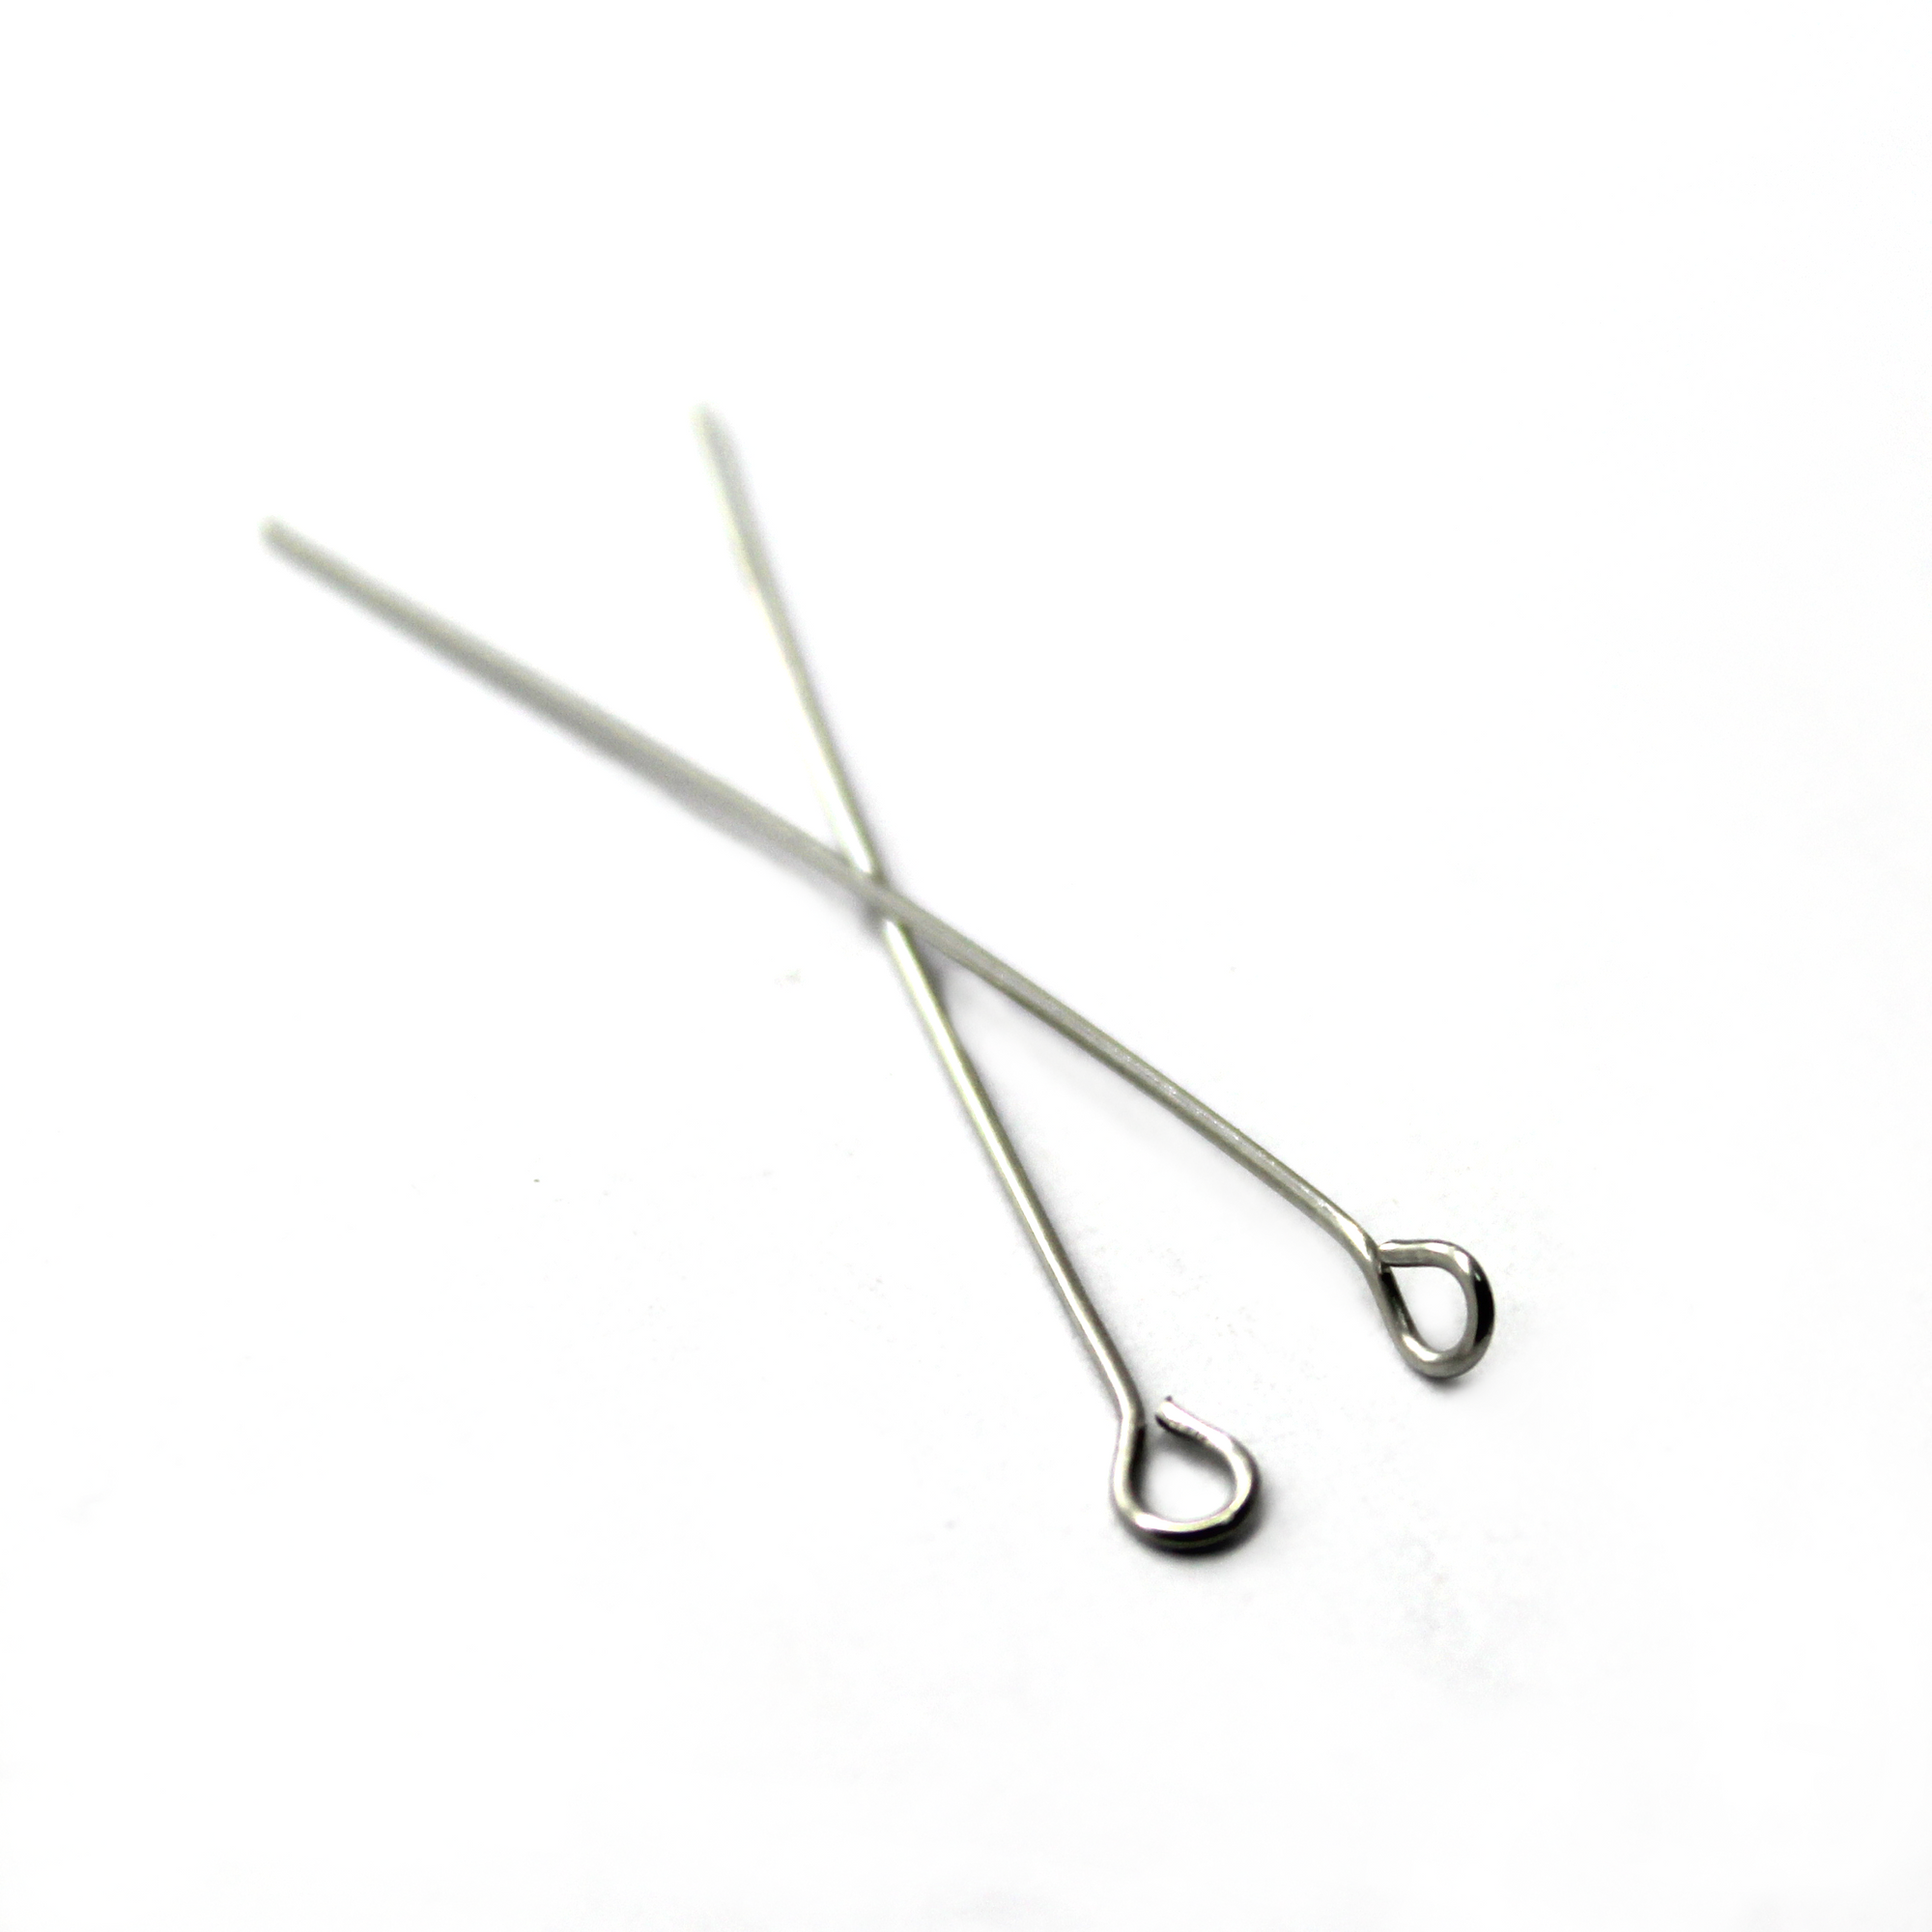 Eye Pins, Silver, Stainless Steel, 1.5inches, 22 Gauge, Sold Per Pkg ~120pcs